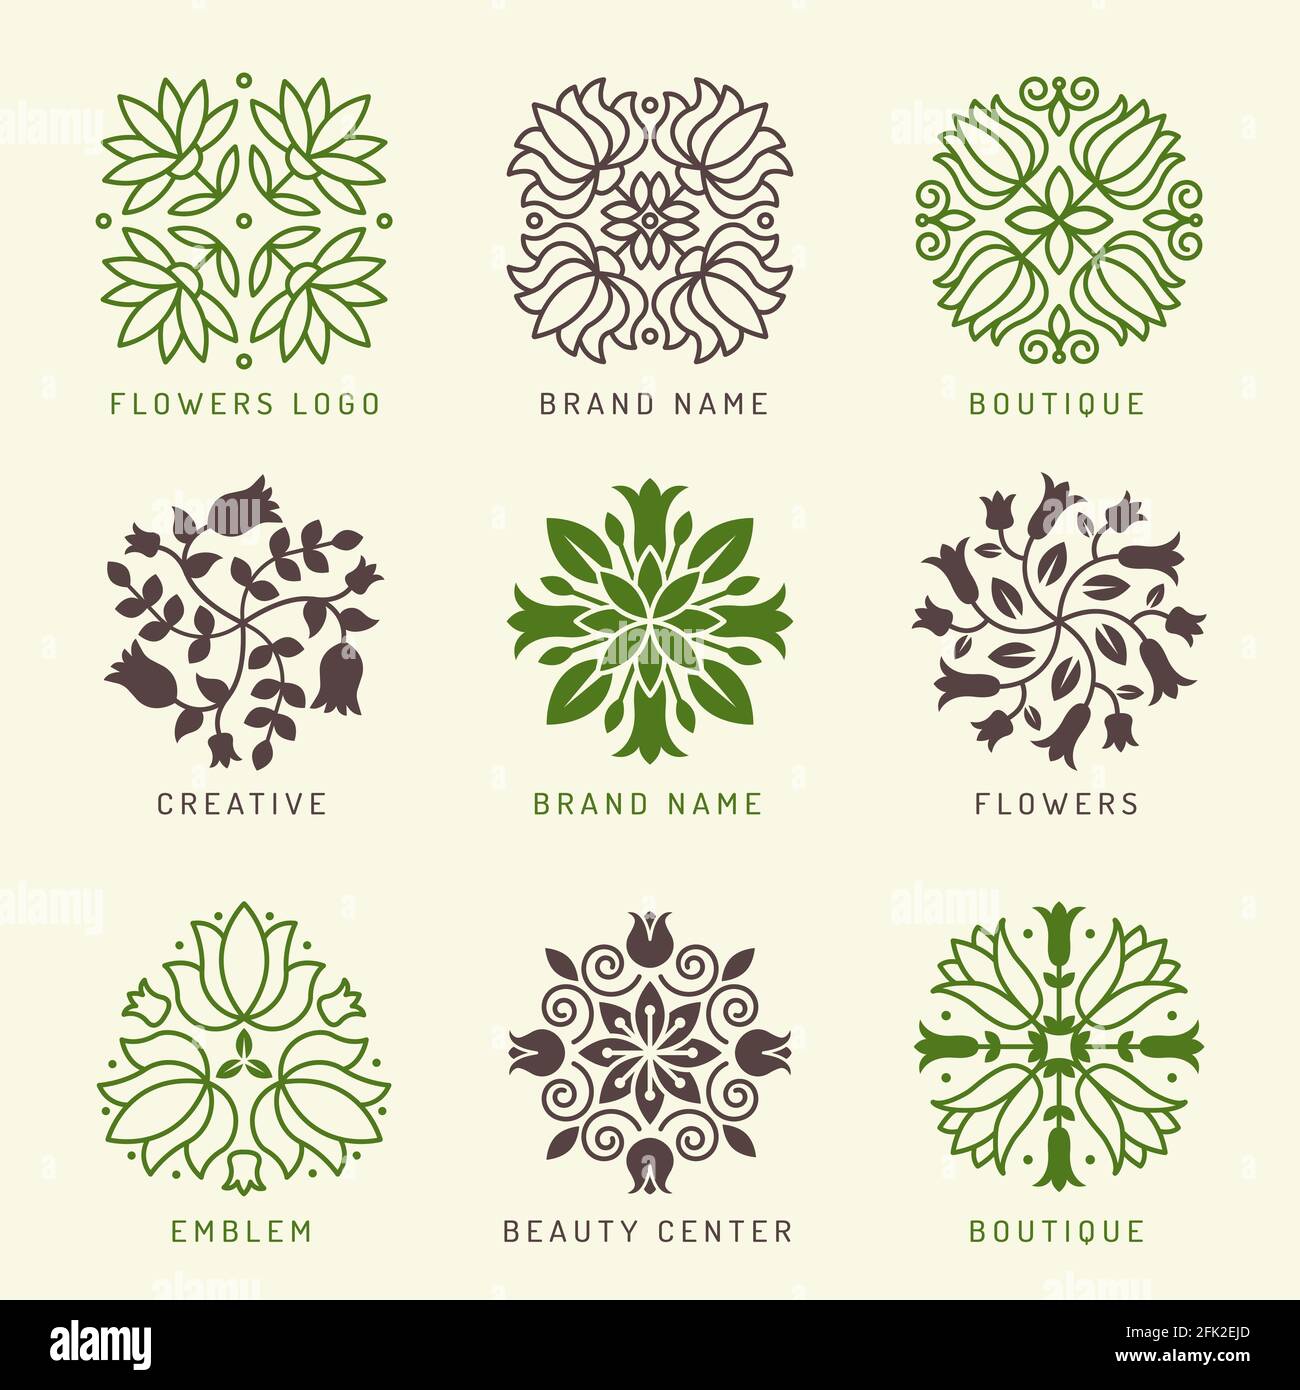 Floral logo. Botanical stylized elements decoration symbols leaves and flowers branches shapes wellness spa cosmetic vector logotype Stock Vector